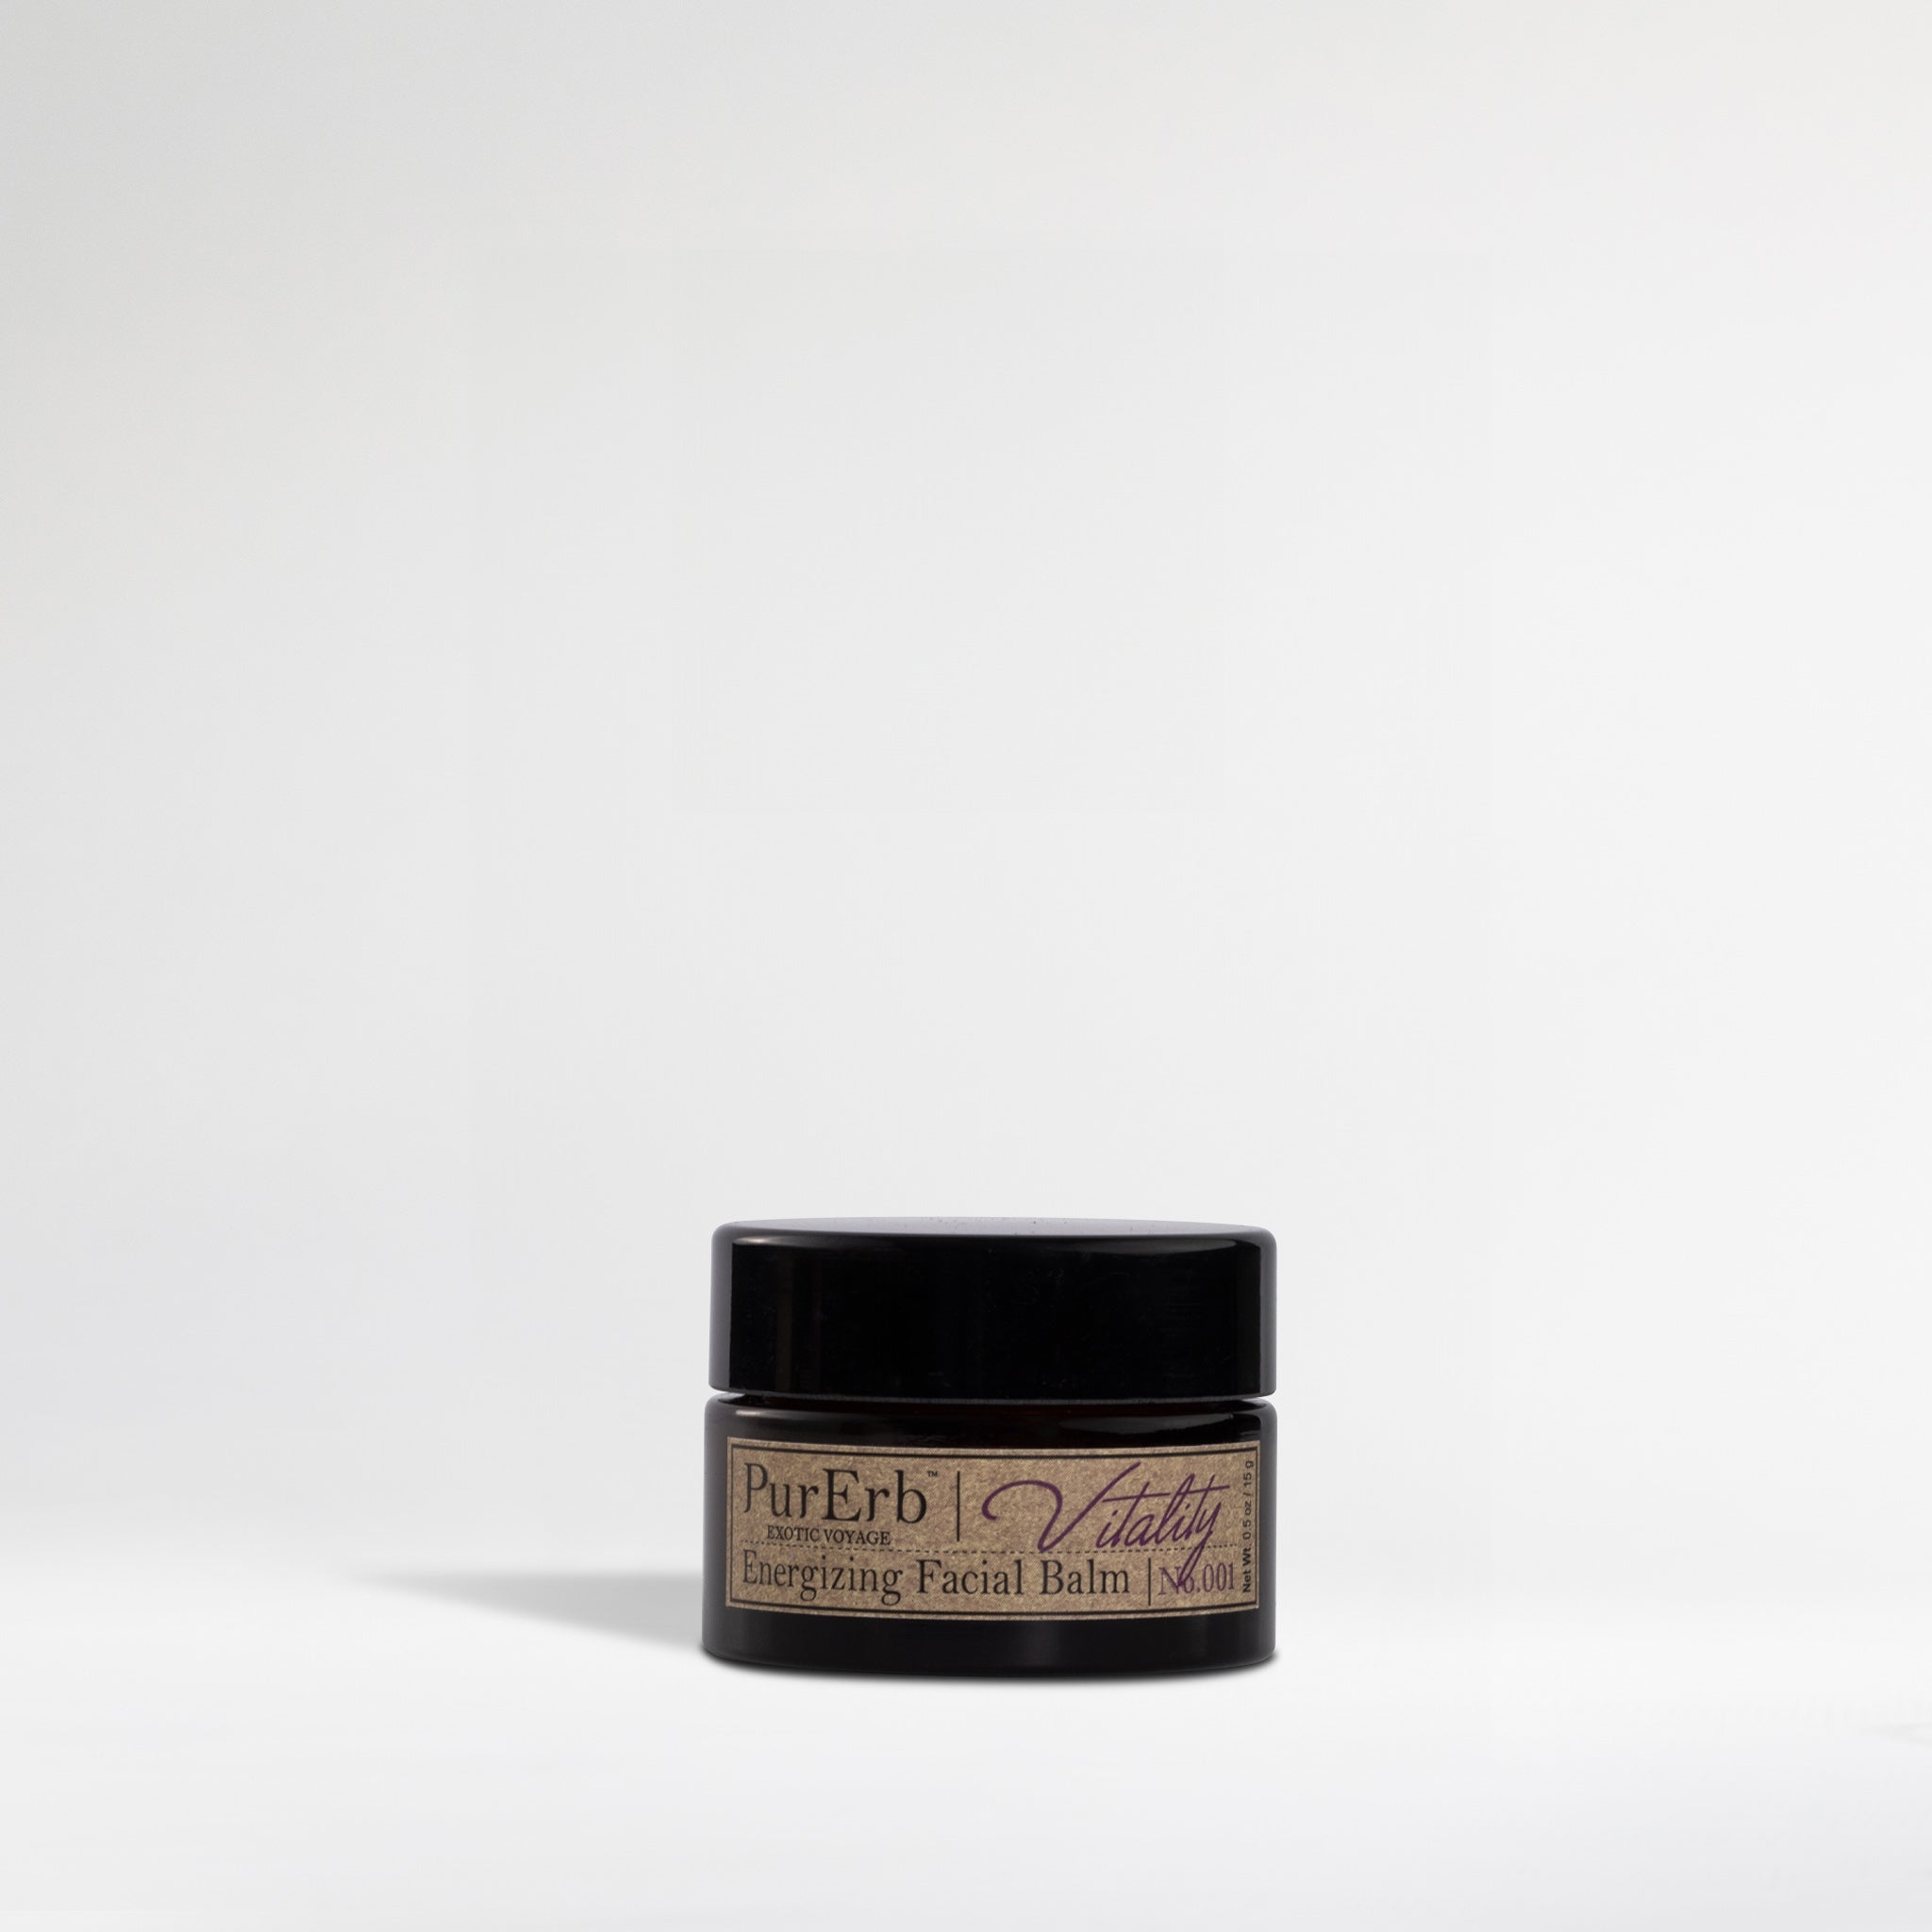 Exotic Oil and Butter Blend Skincare Balm - Sacha Inchi, Moringa, Abyssinian, Kukui - Improves Texture, Moisturizes, and Awakens Senses with Spicy Citrus Aroma